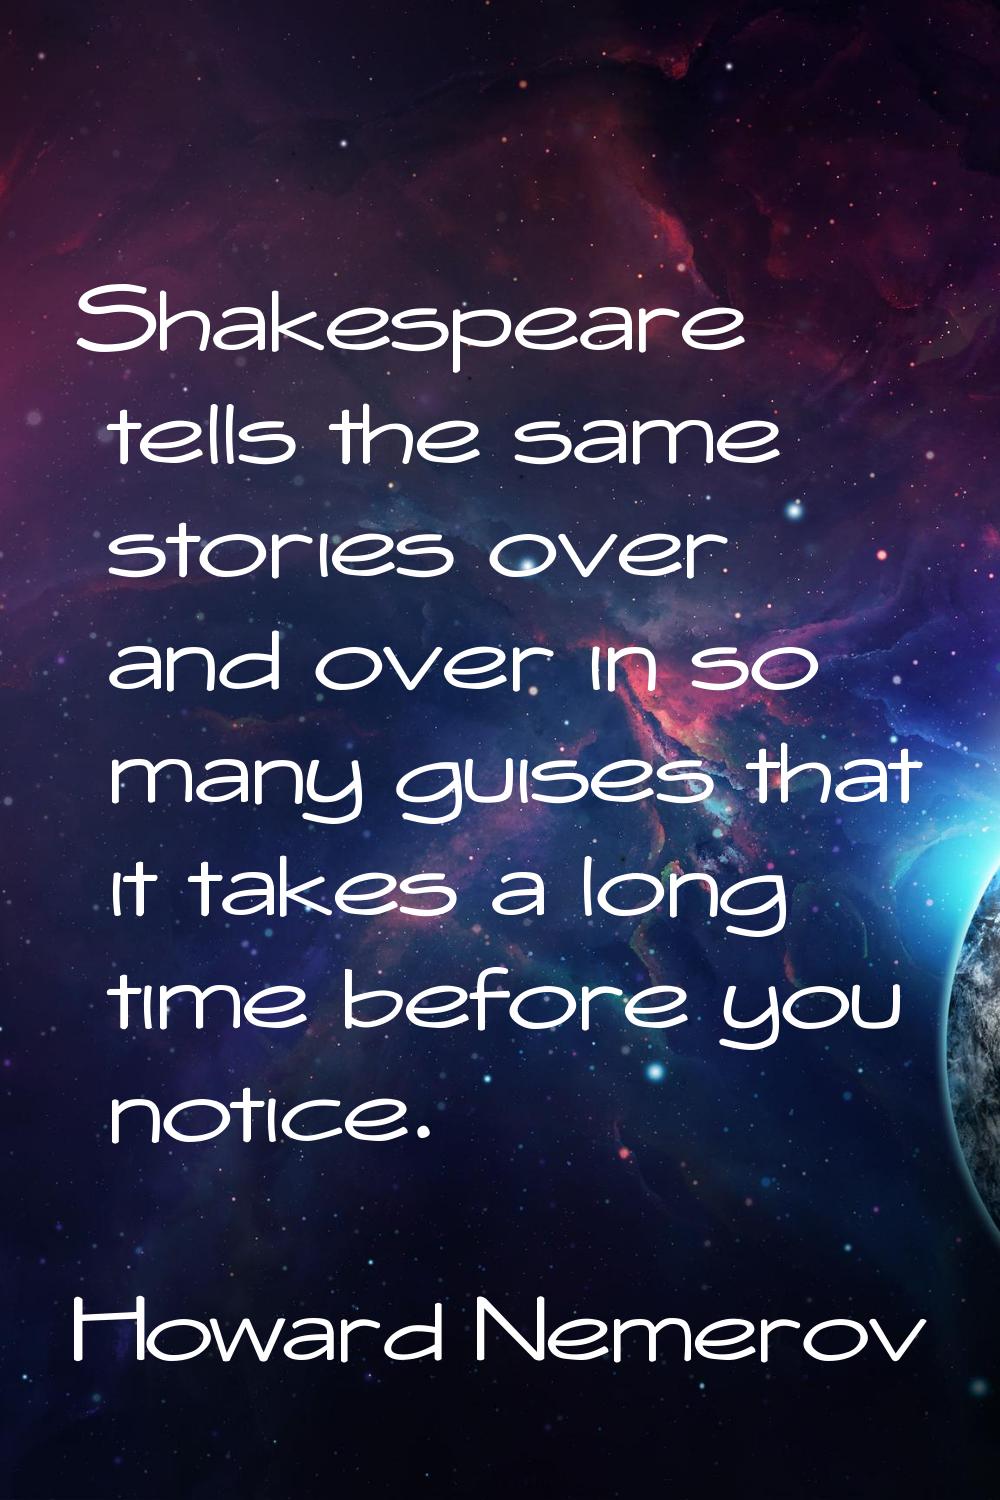 Shakespeare tells the same stories over and over in so many guises that it takes a long time before